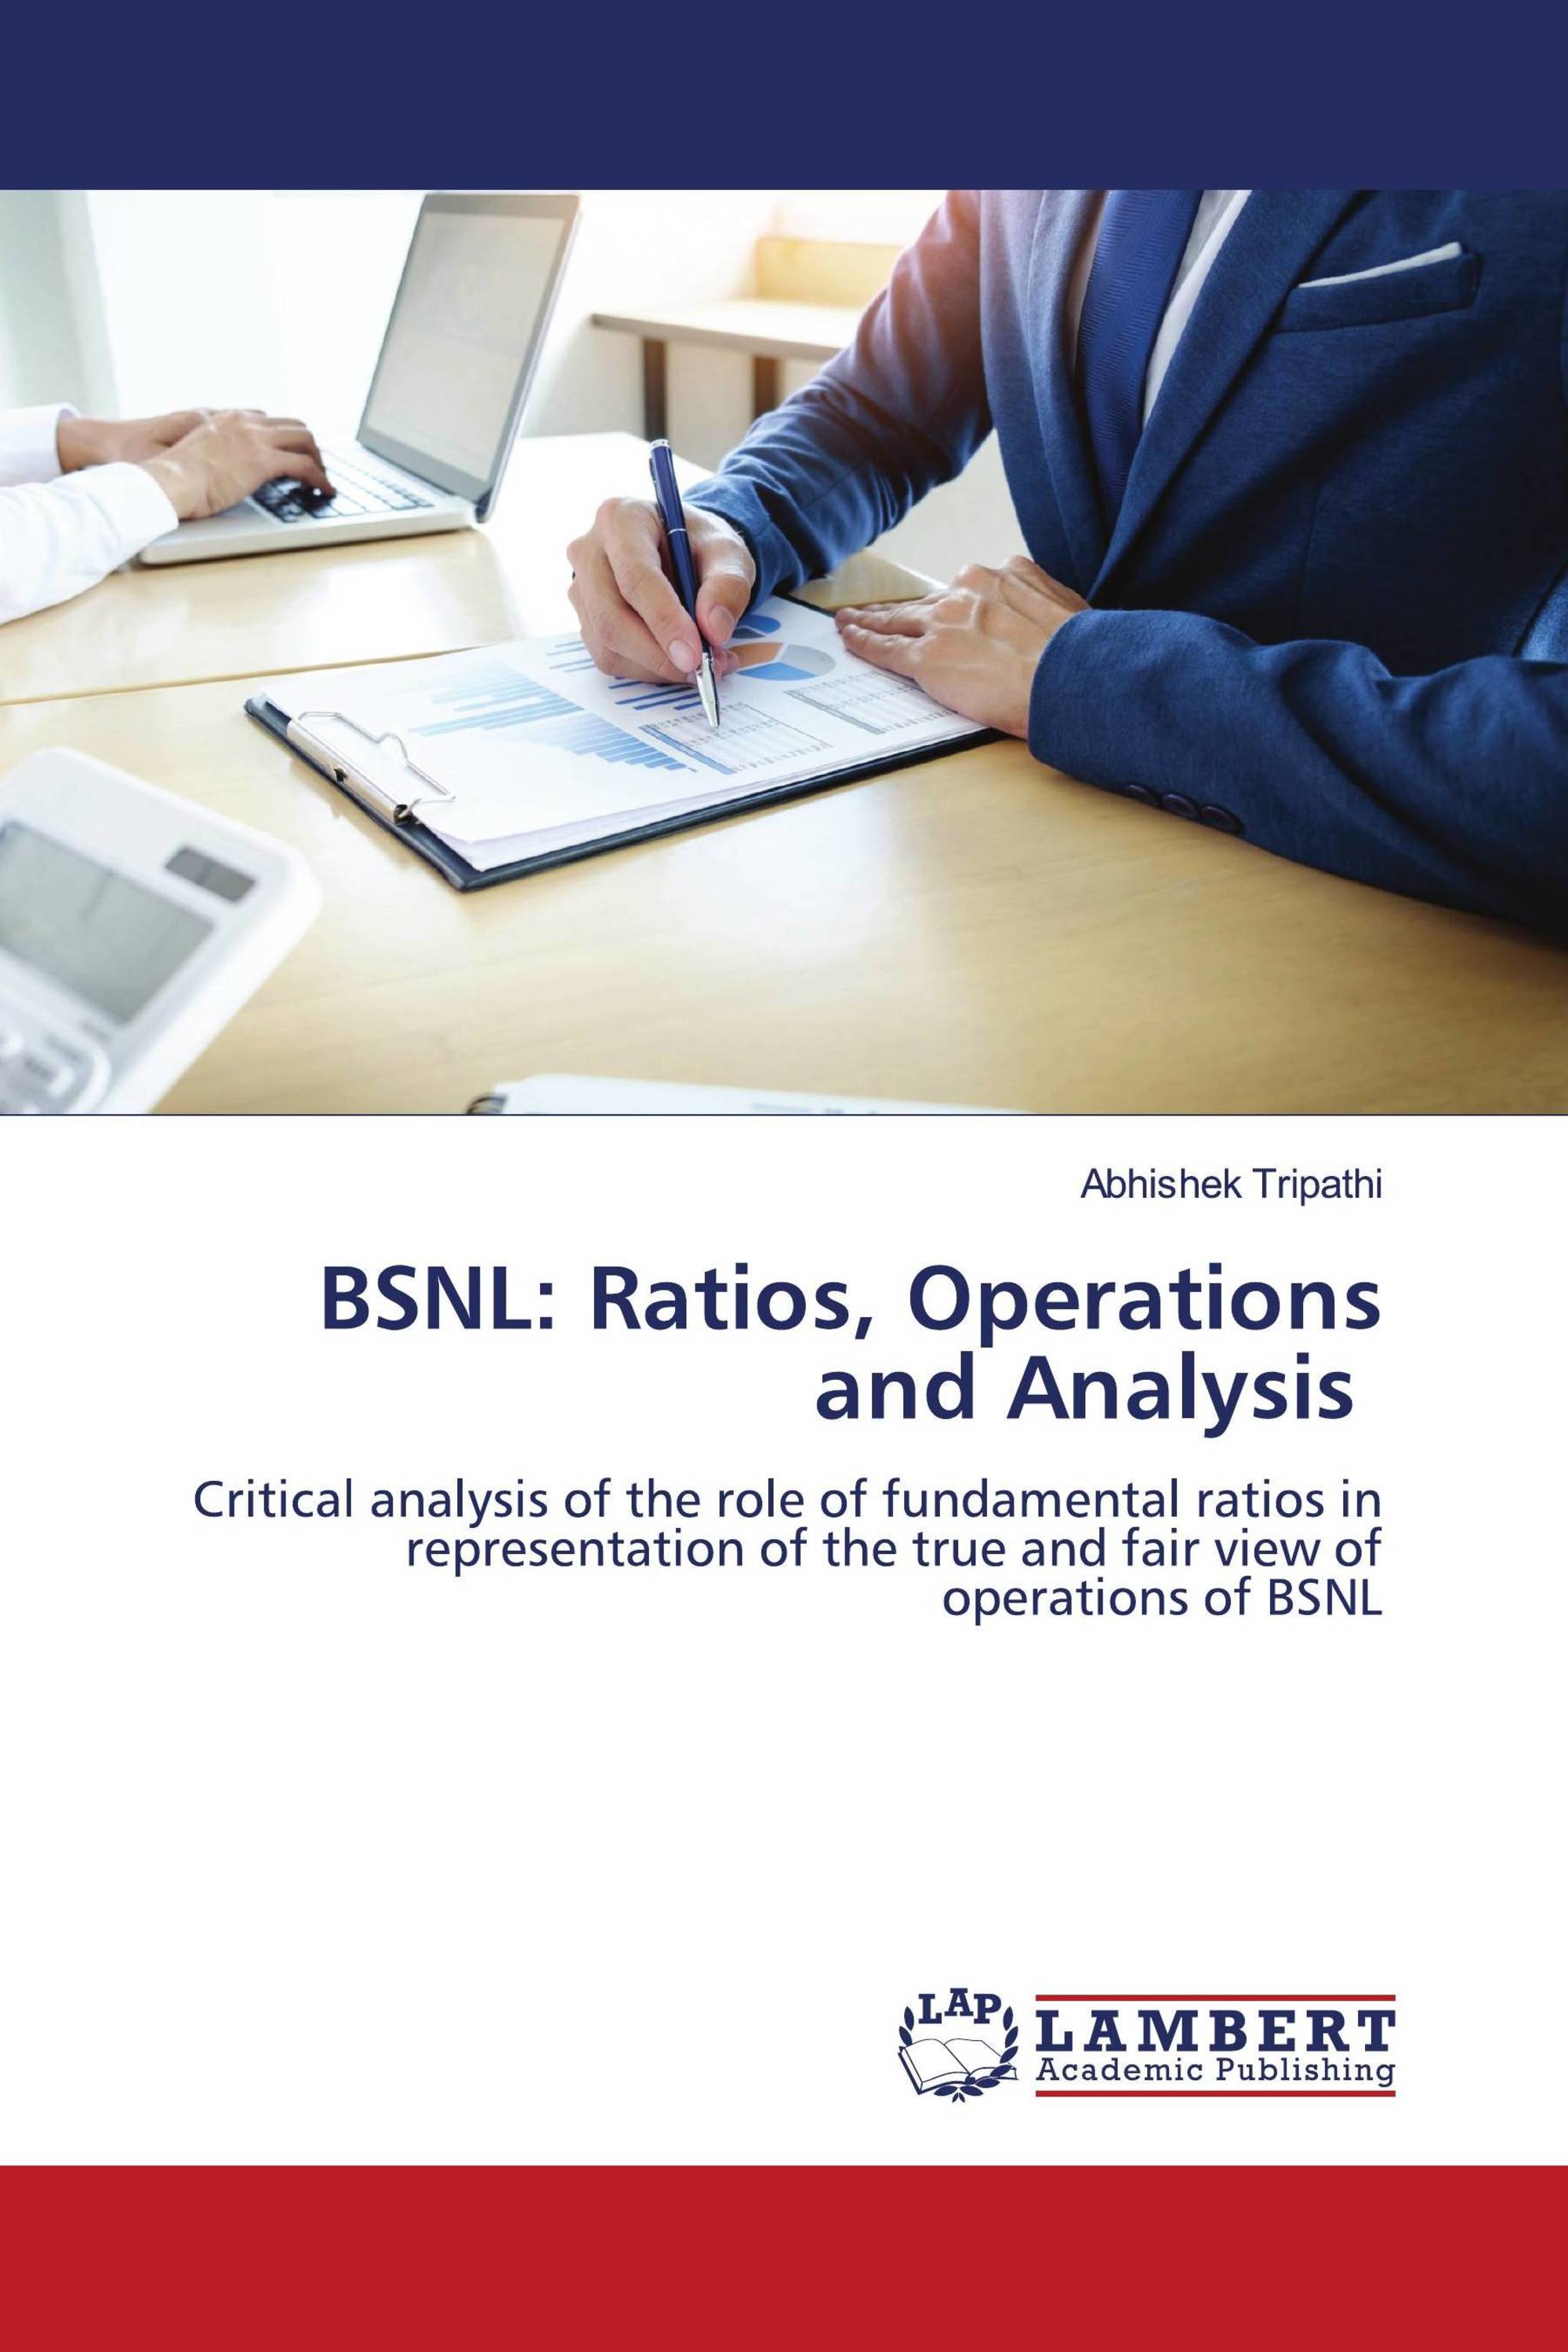 BSNL: Ratios, Operations and Analysis